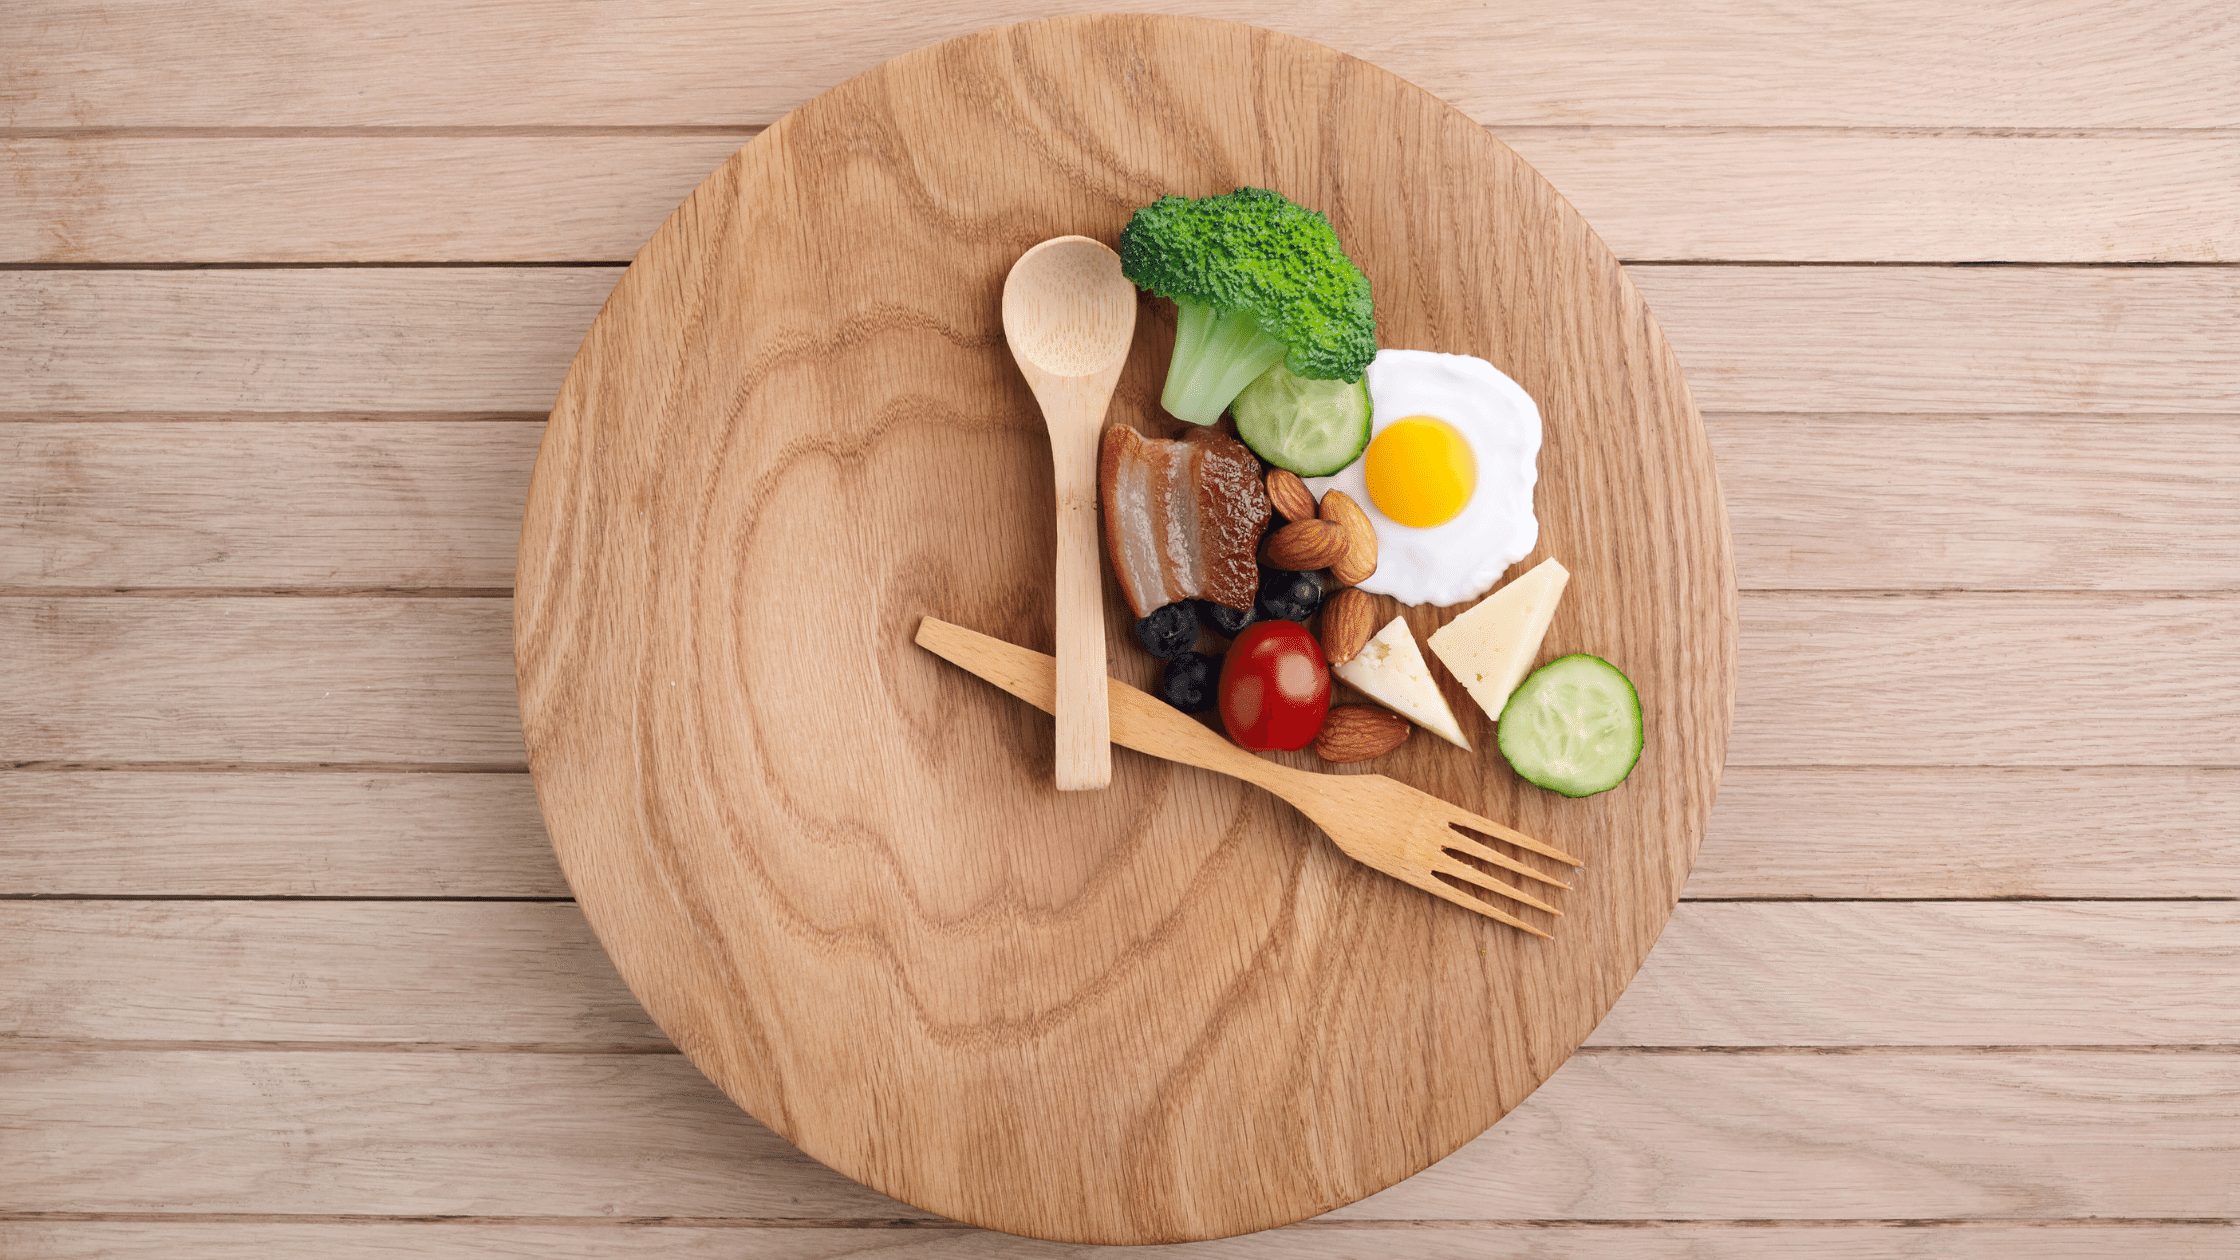 Symbolizing intermittent fasting with food displayed on plate as a clock